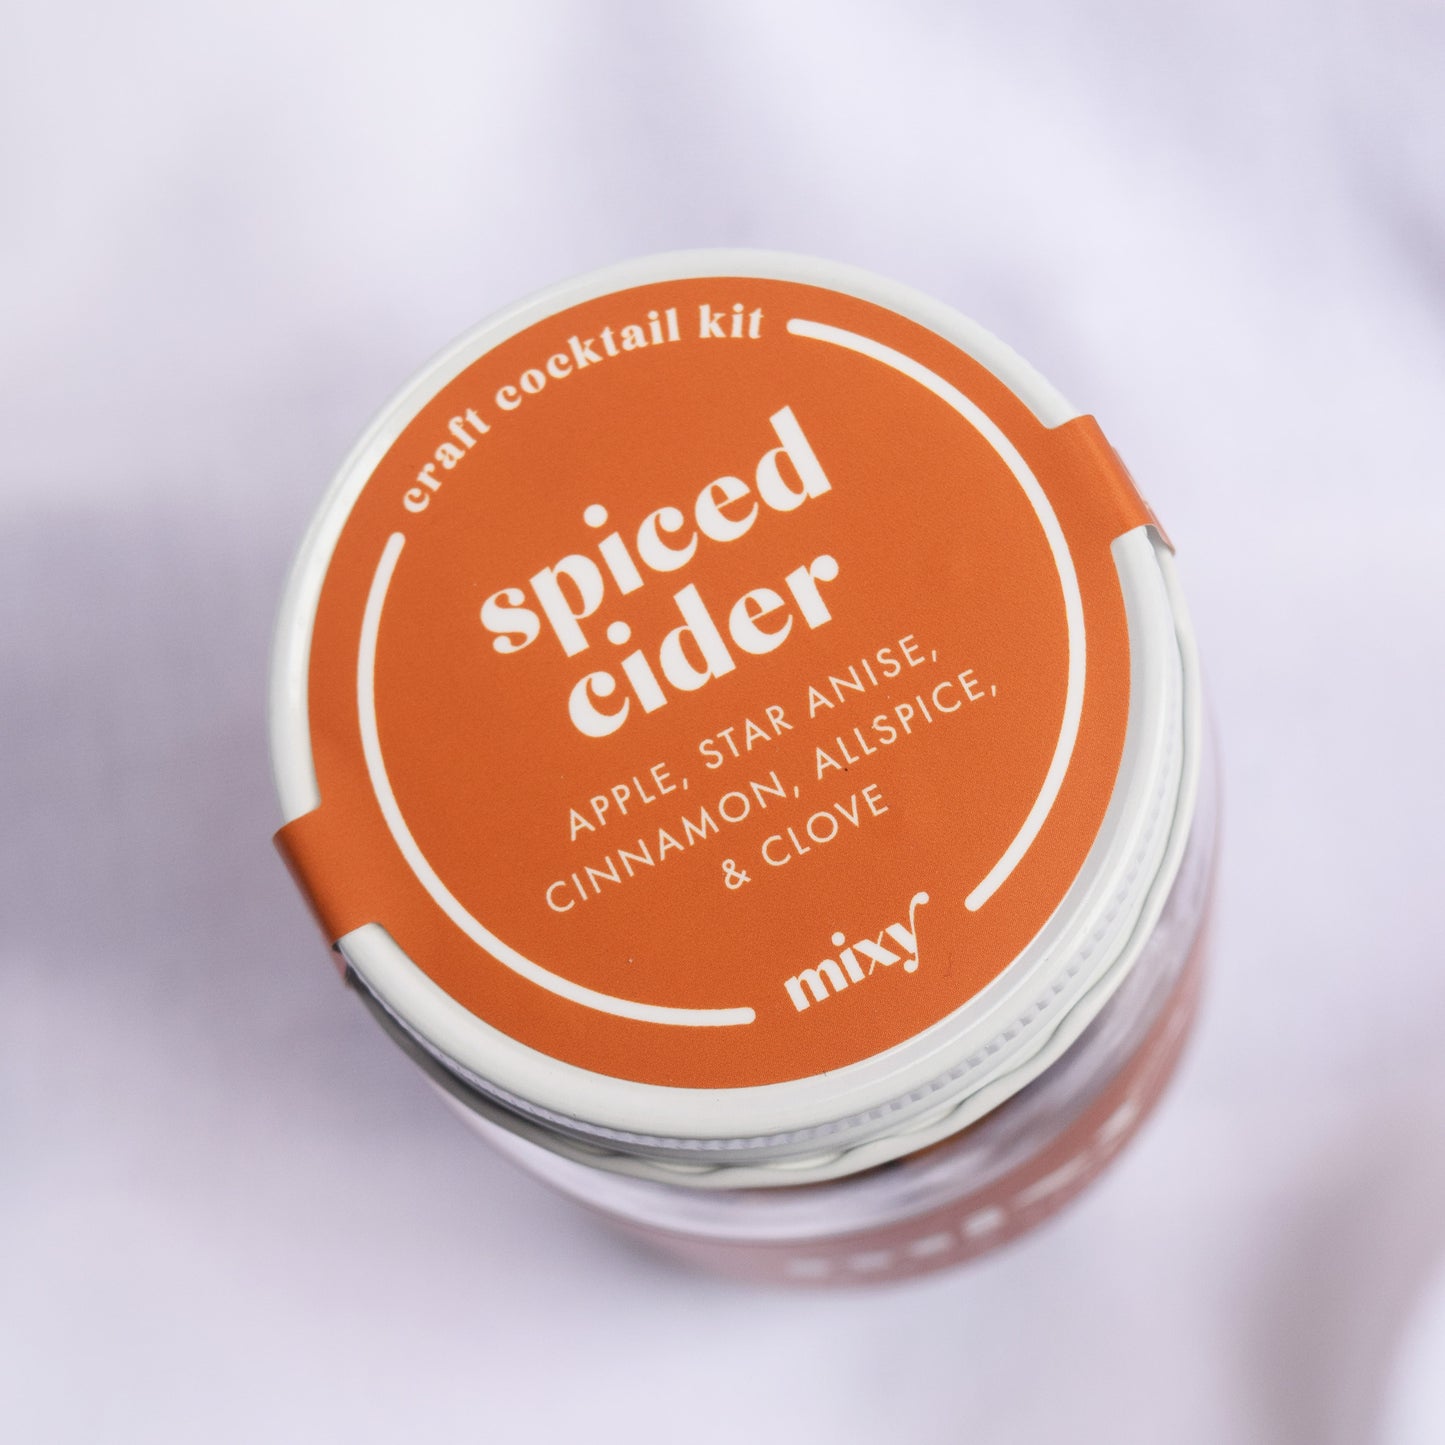 Spiced Cider Holiday Craft Cocktail Kit